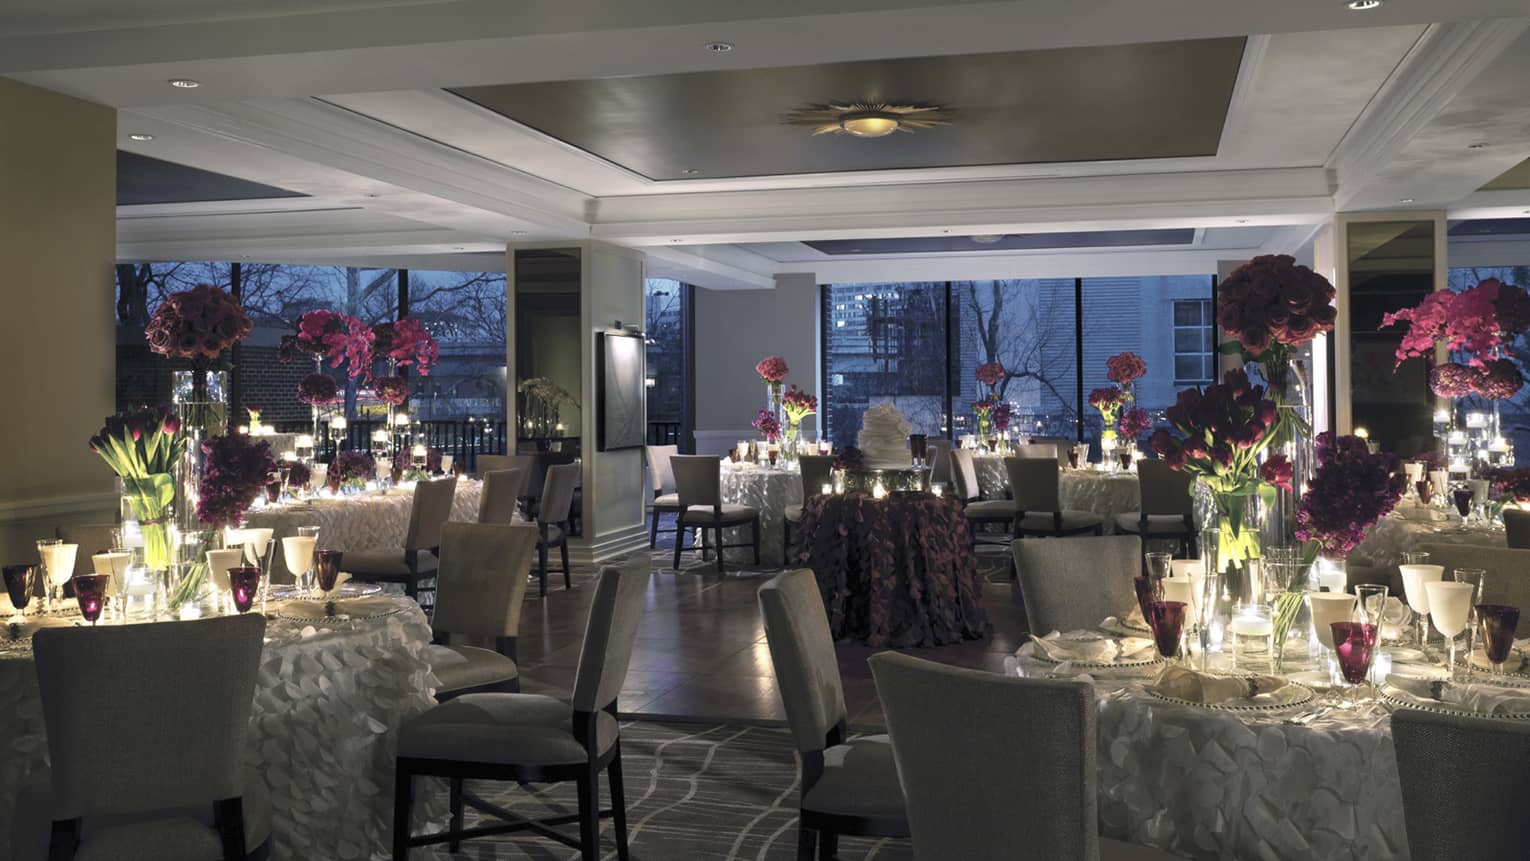 Seasons dining room wedding banquet setting at night with candle-lit tables, fringed tablecloths, floral centrepieces